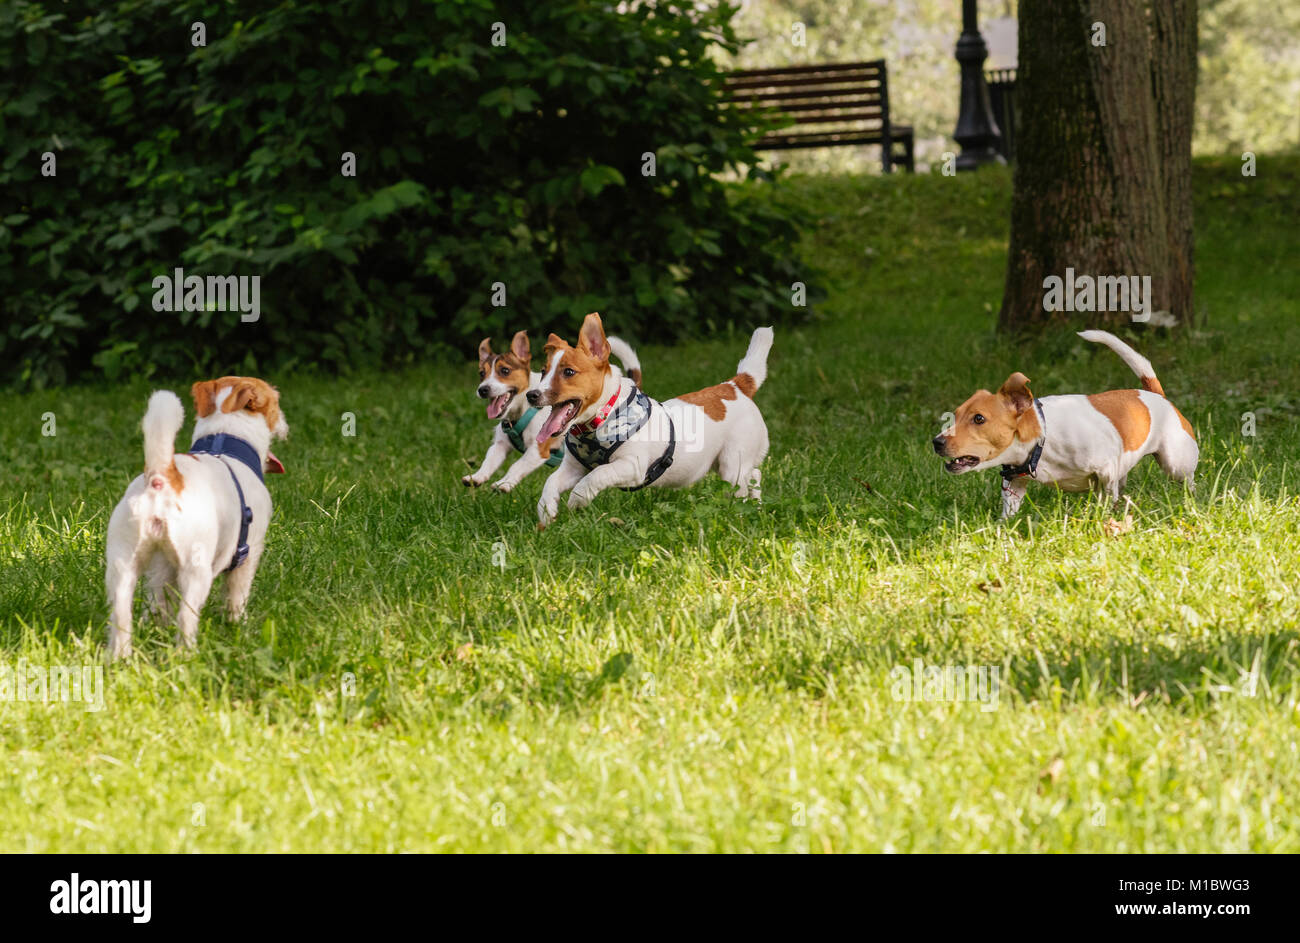 Pack of four Jack Russell Terrier dogs romping and frolicking off leash at park Stock Photo